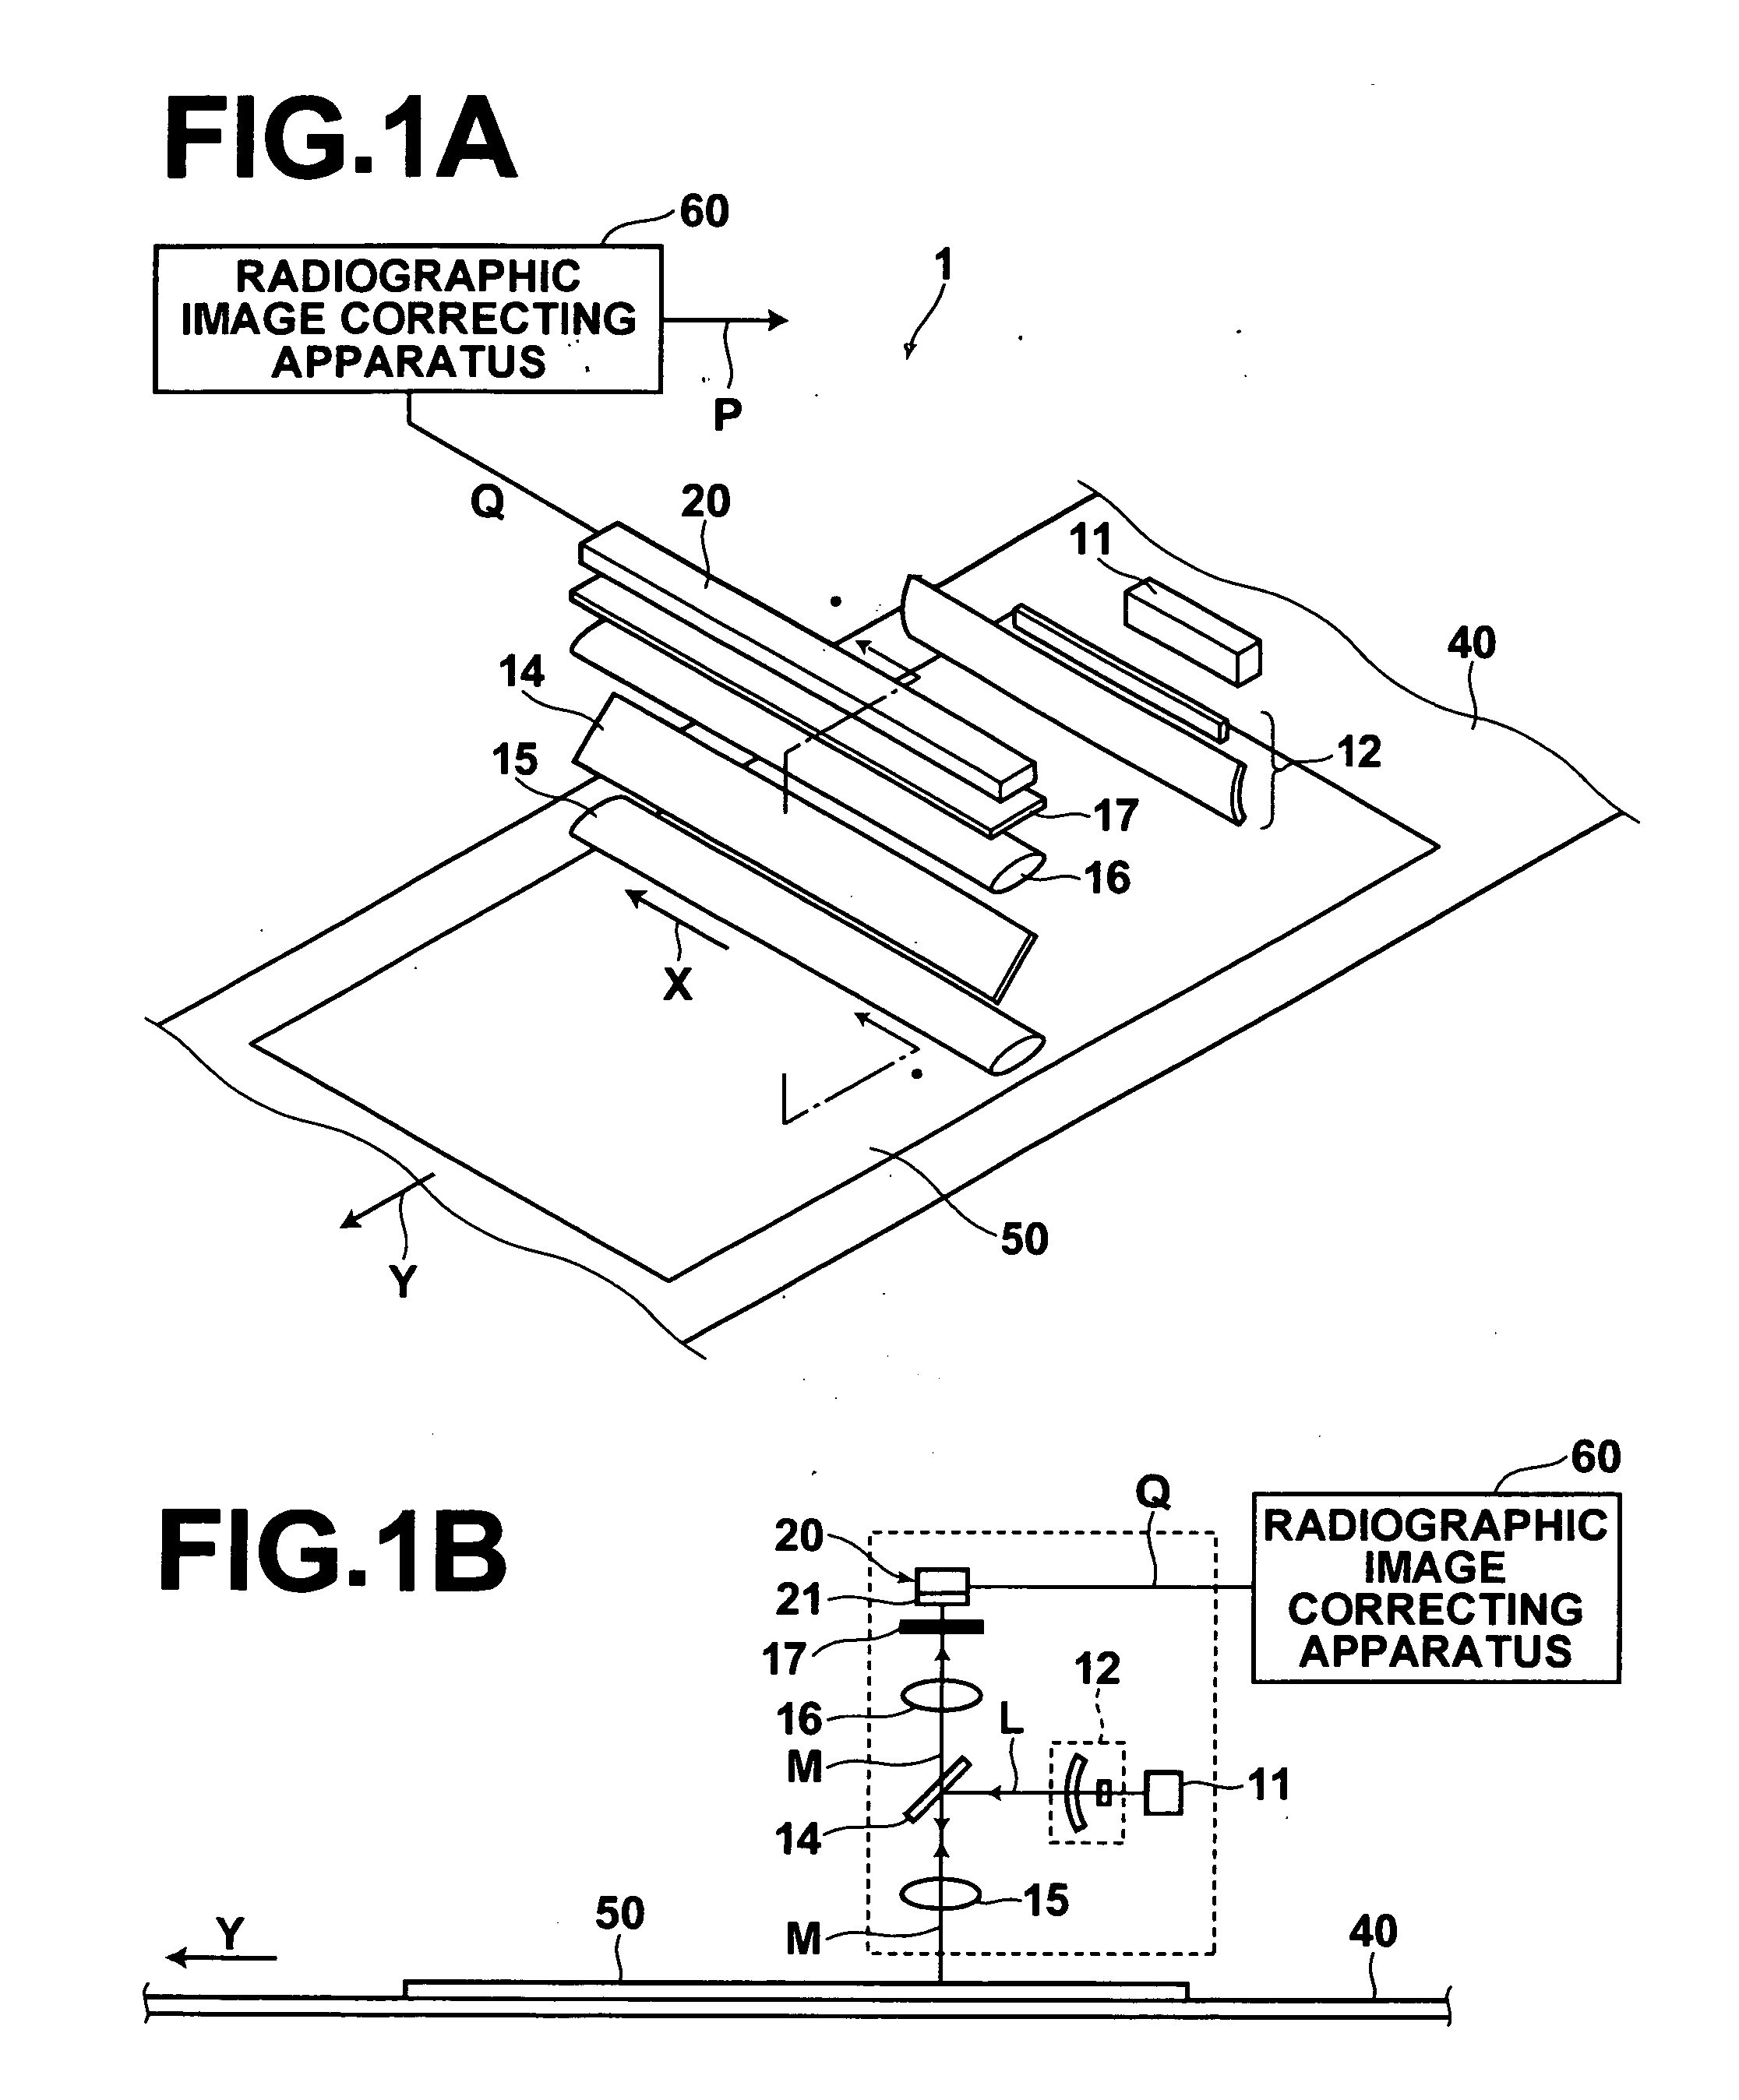 Method and apparatus for correcting radiographic images